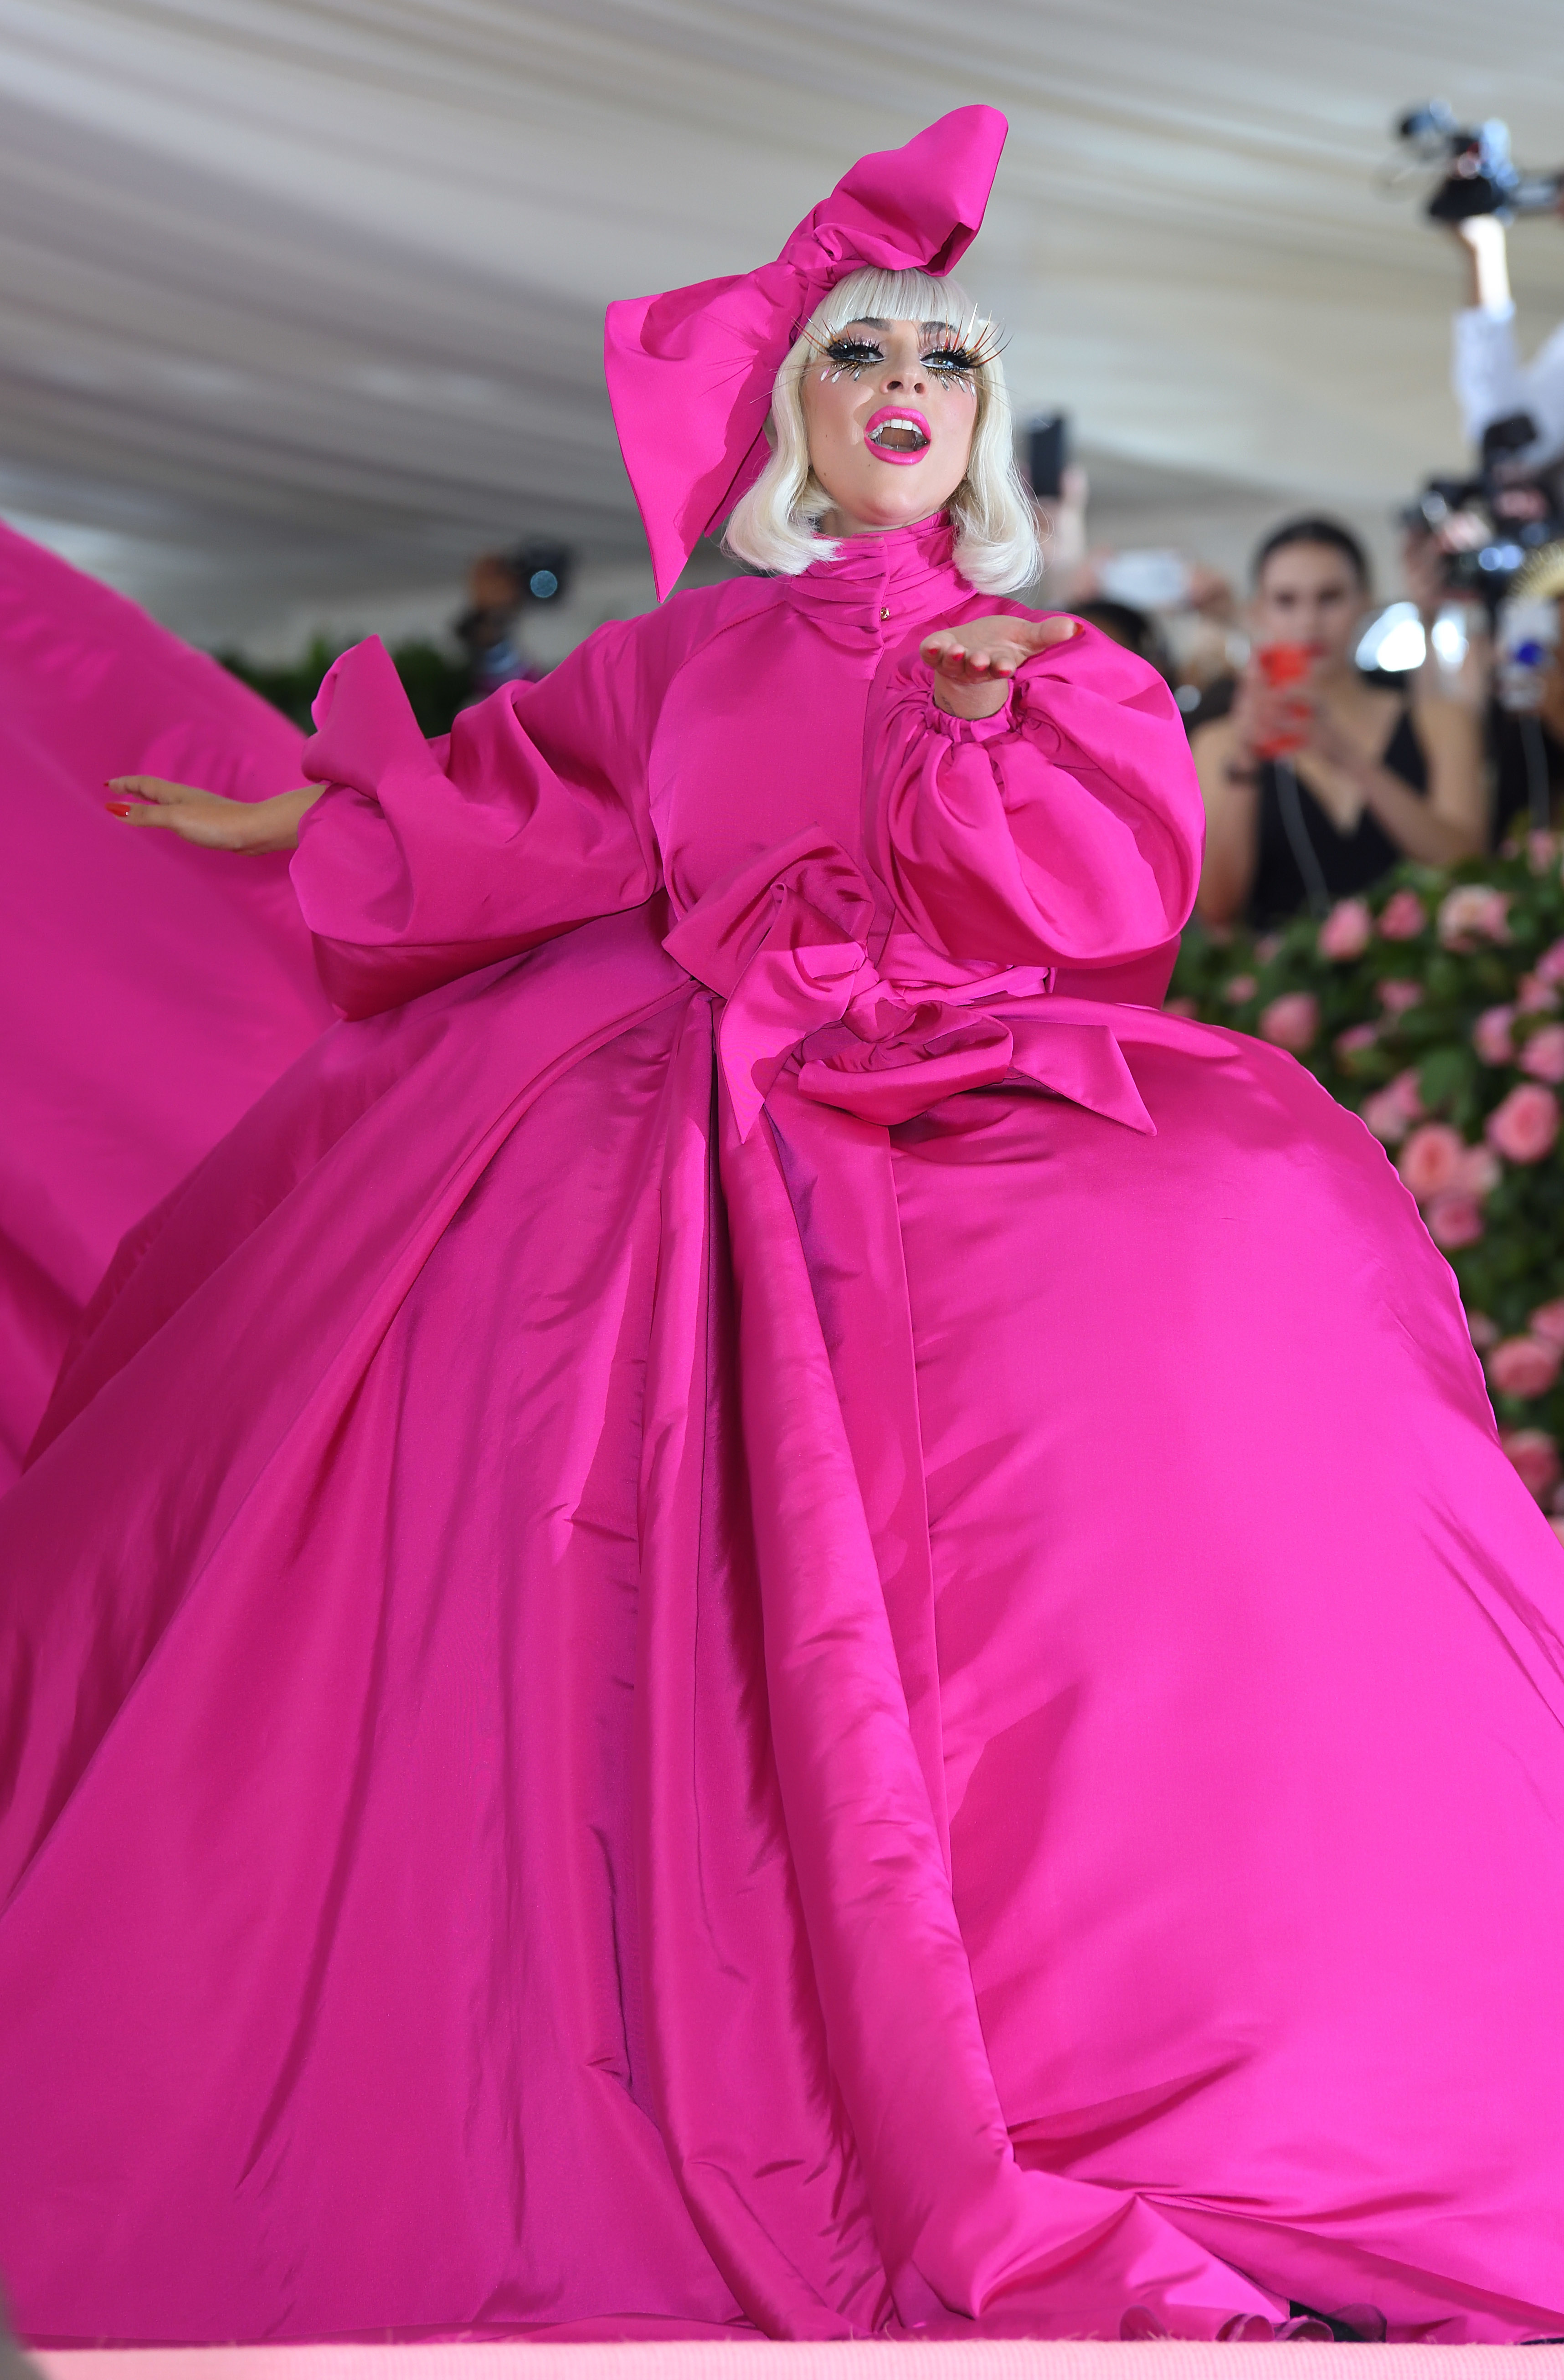 Lady Gaga at the Met Gala in an extravagant pink gown/overcoat with a large bow and matching headpiece